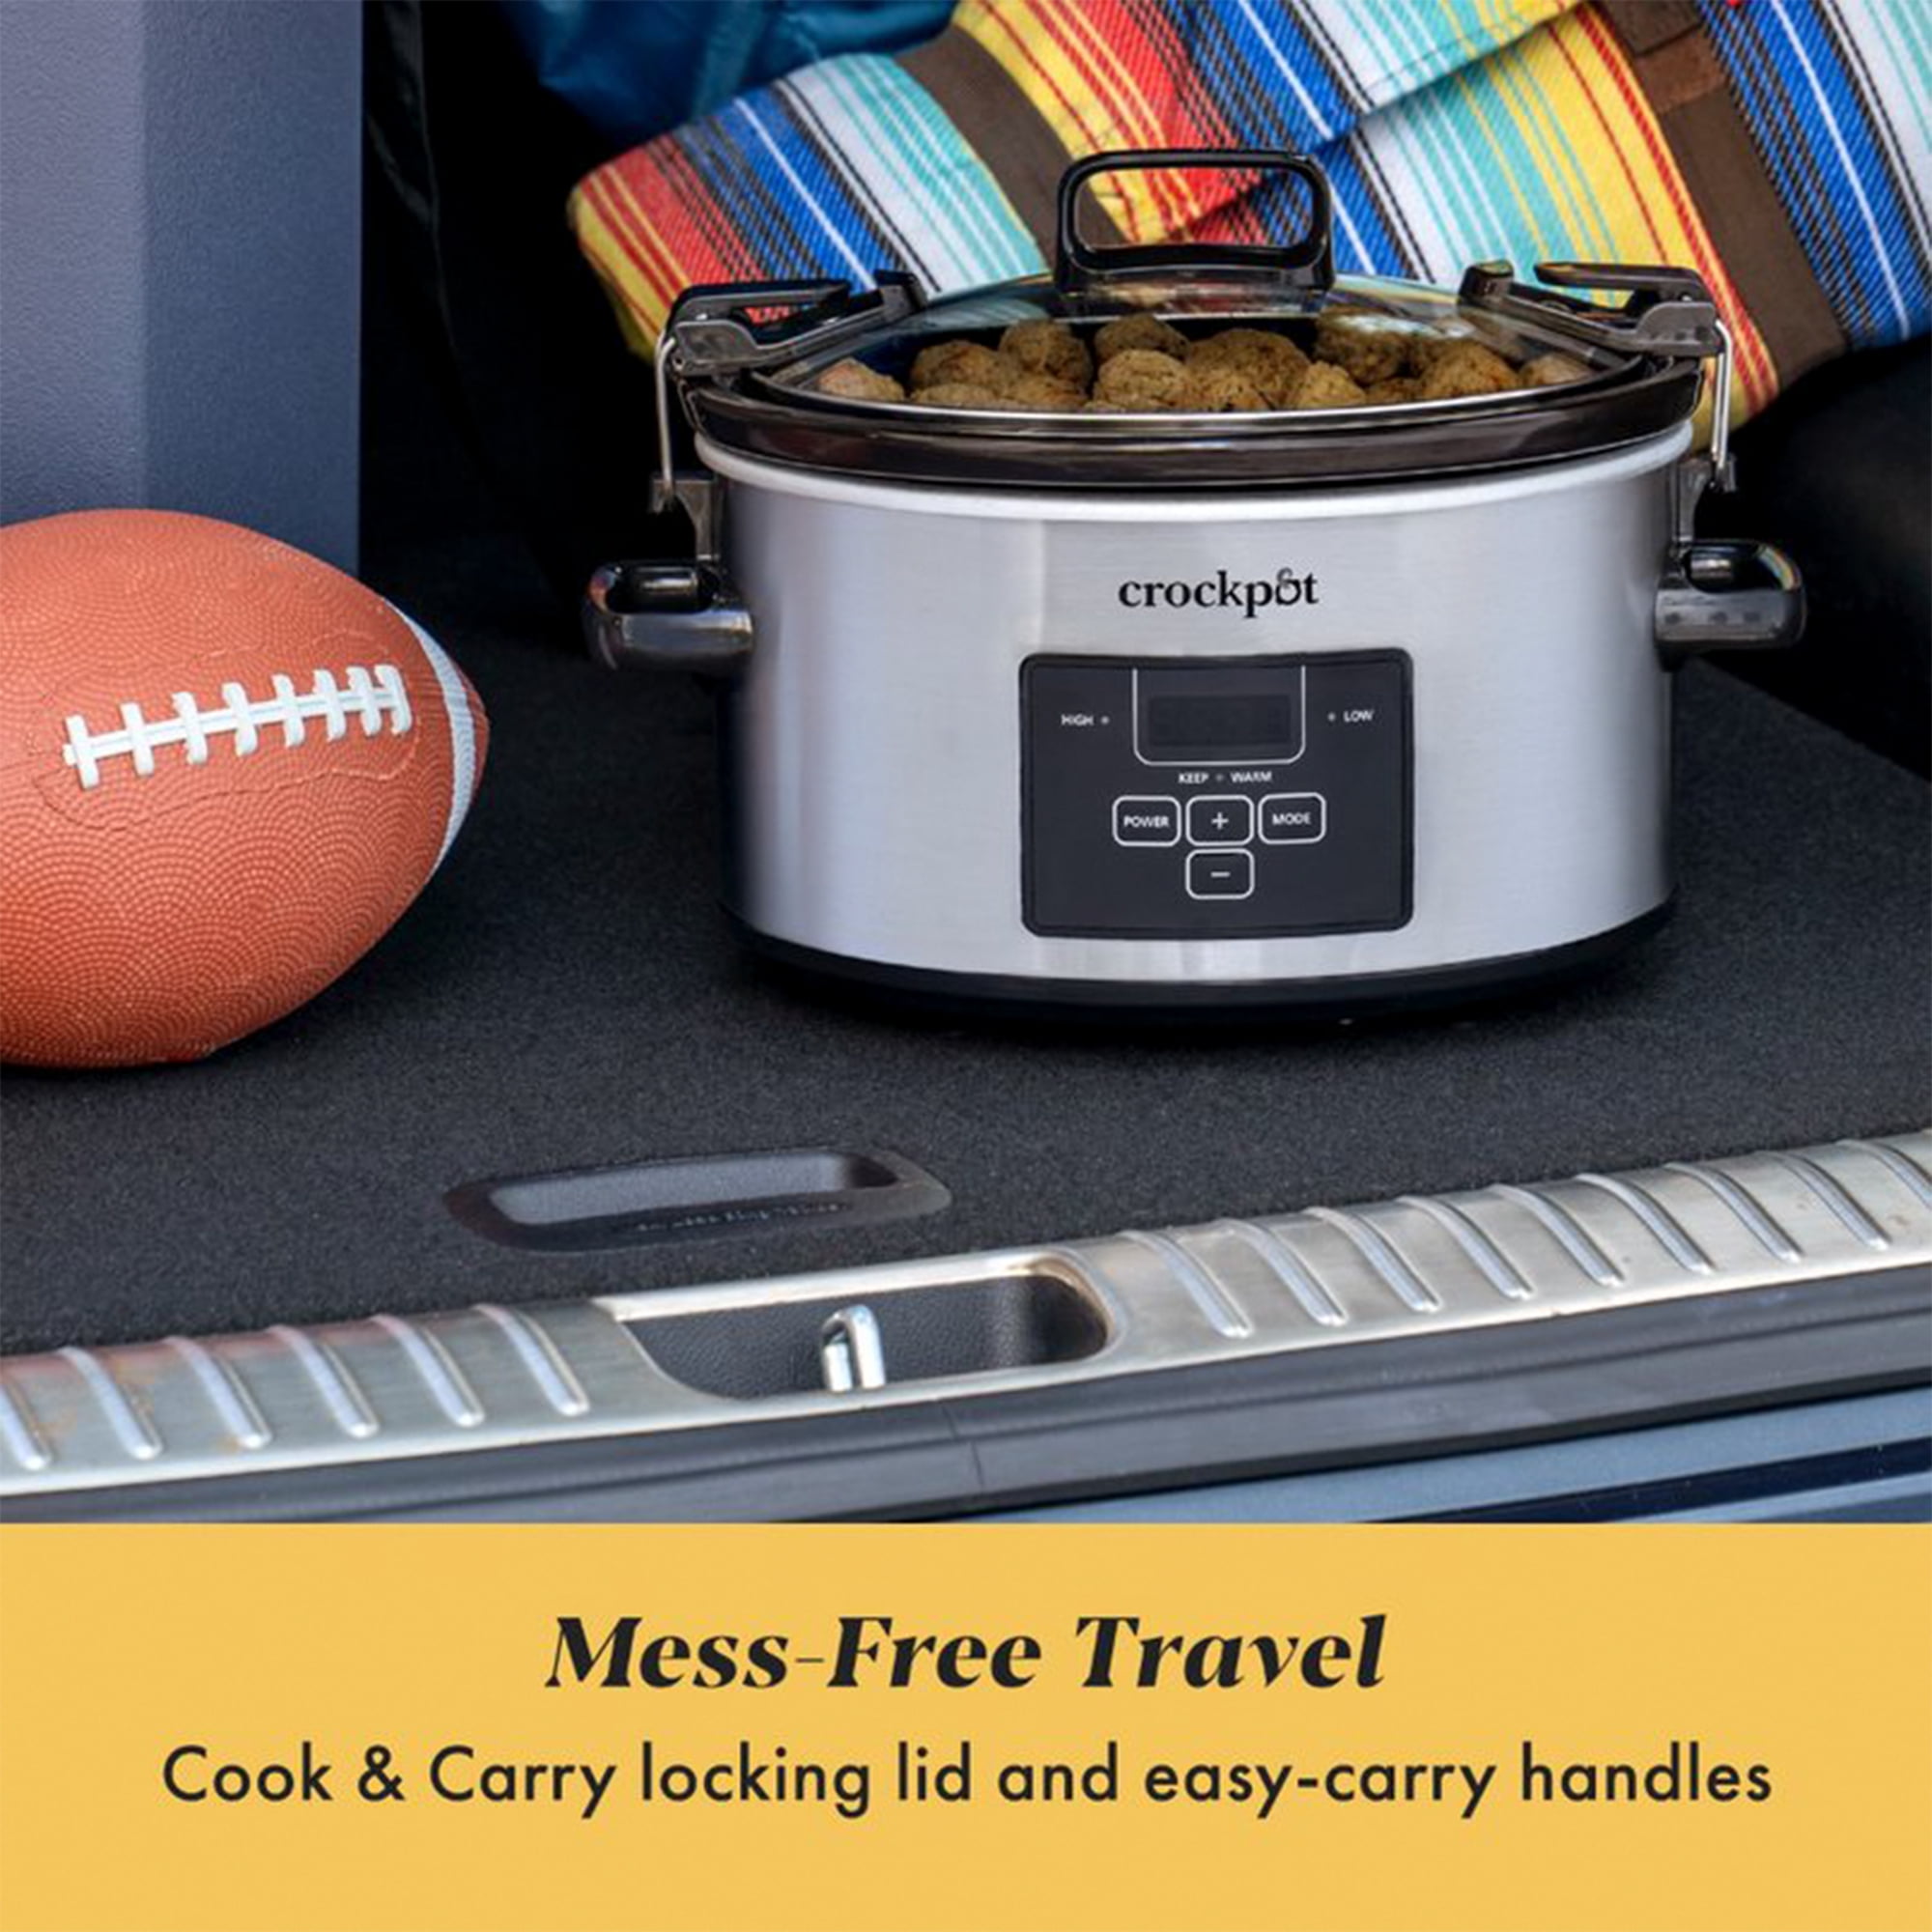 Crock-Pot 4 Programmable and Cooker, Cook Steel Stainless Carry Quart Slow